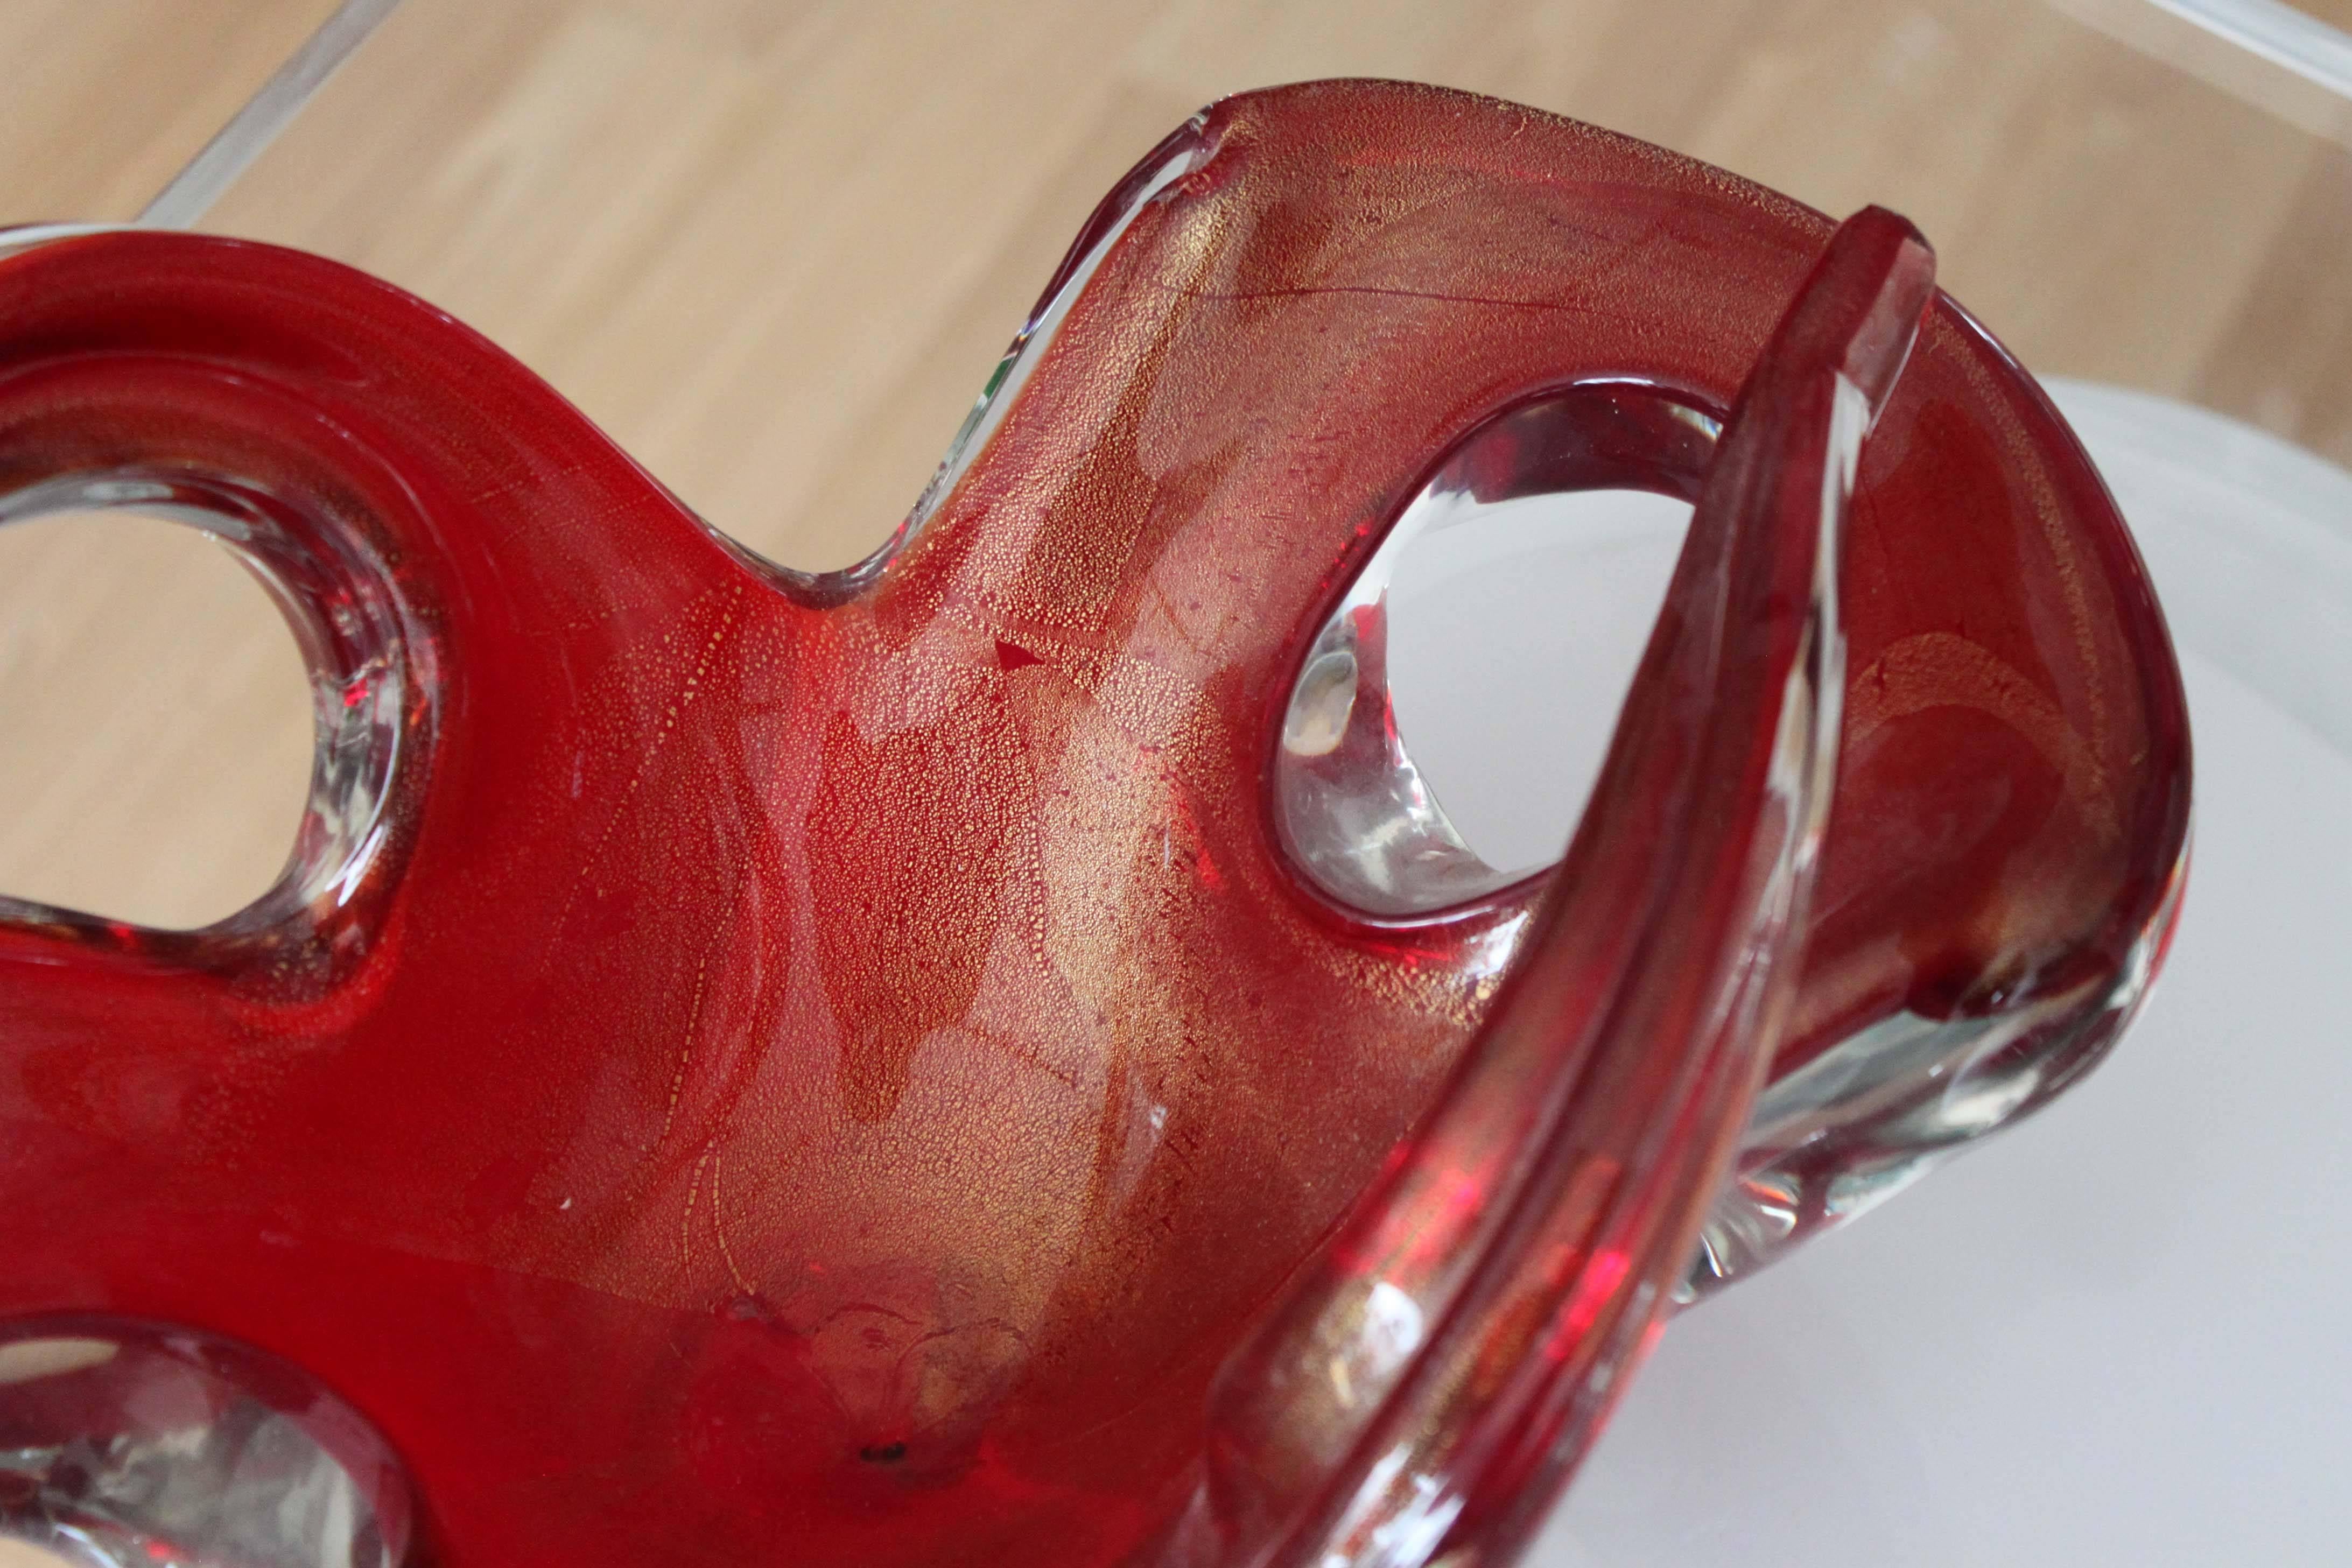 Abstract Murano art glass bowl or centrepiece. Excellent condition, beautiful crimson red with gold detail.